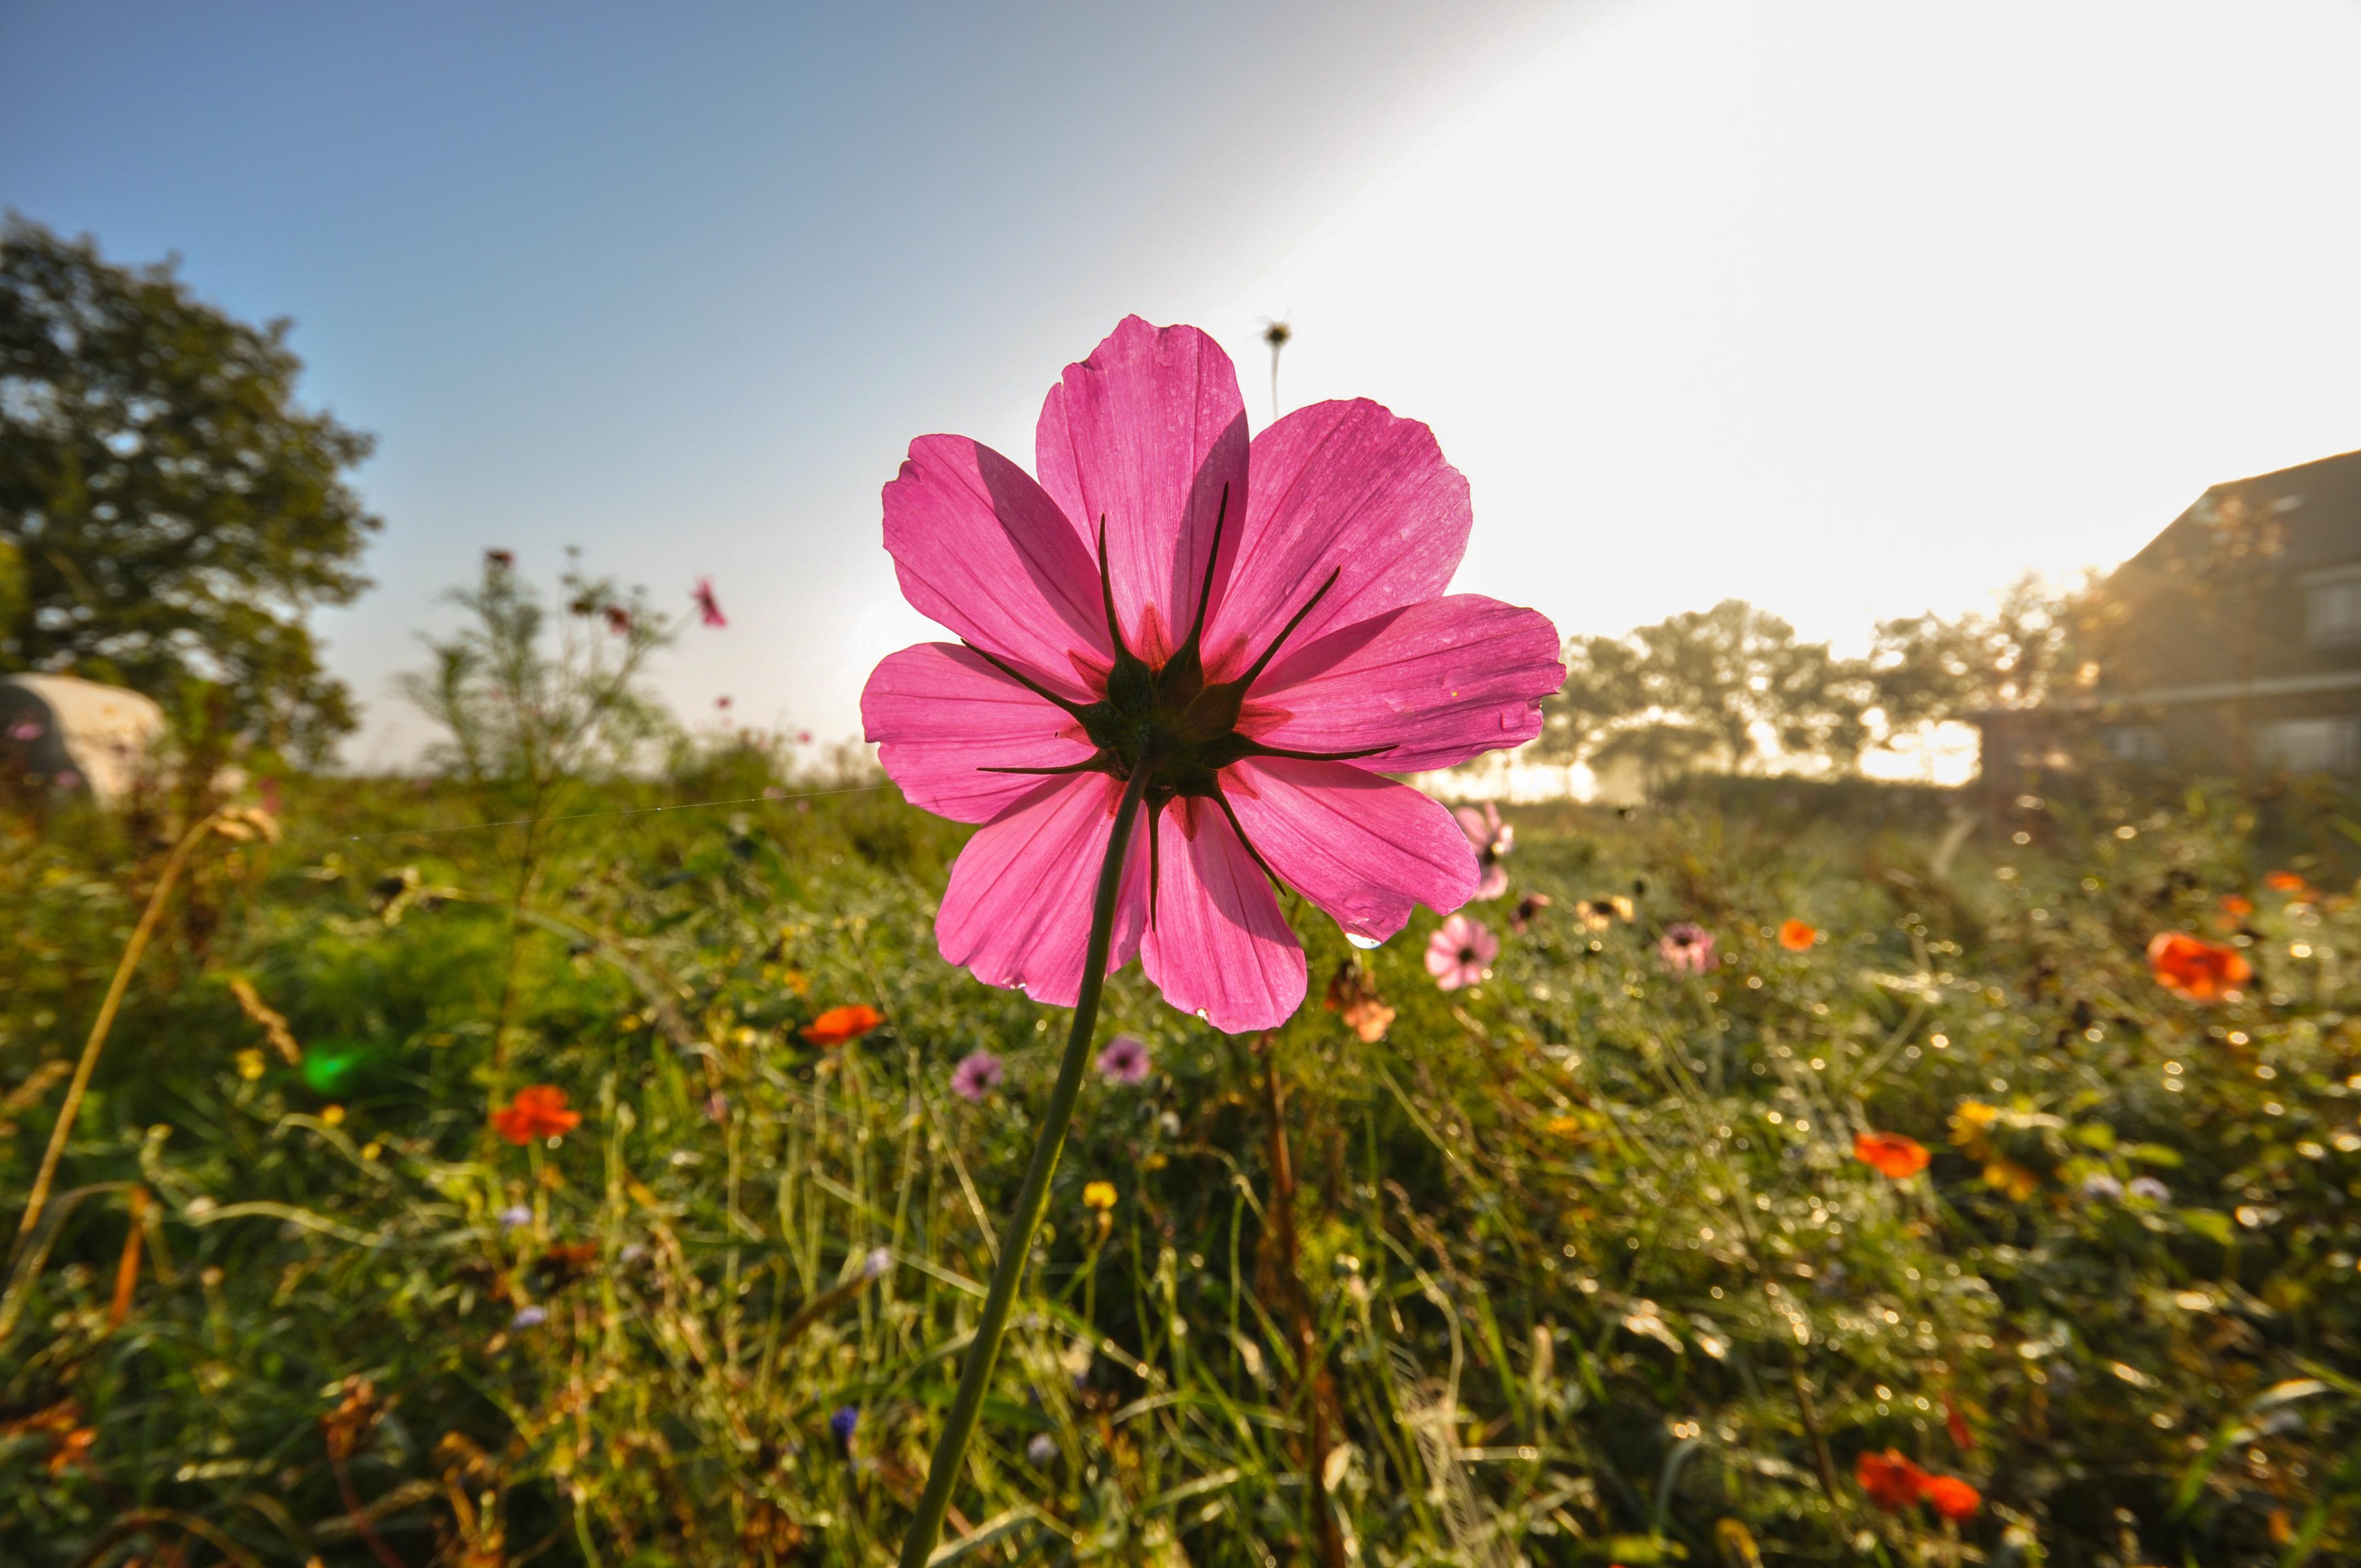 Field Meadow Flower Pink Image. Free Stock Image Library